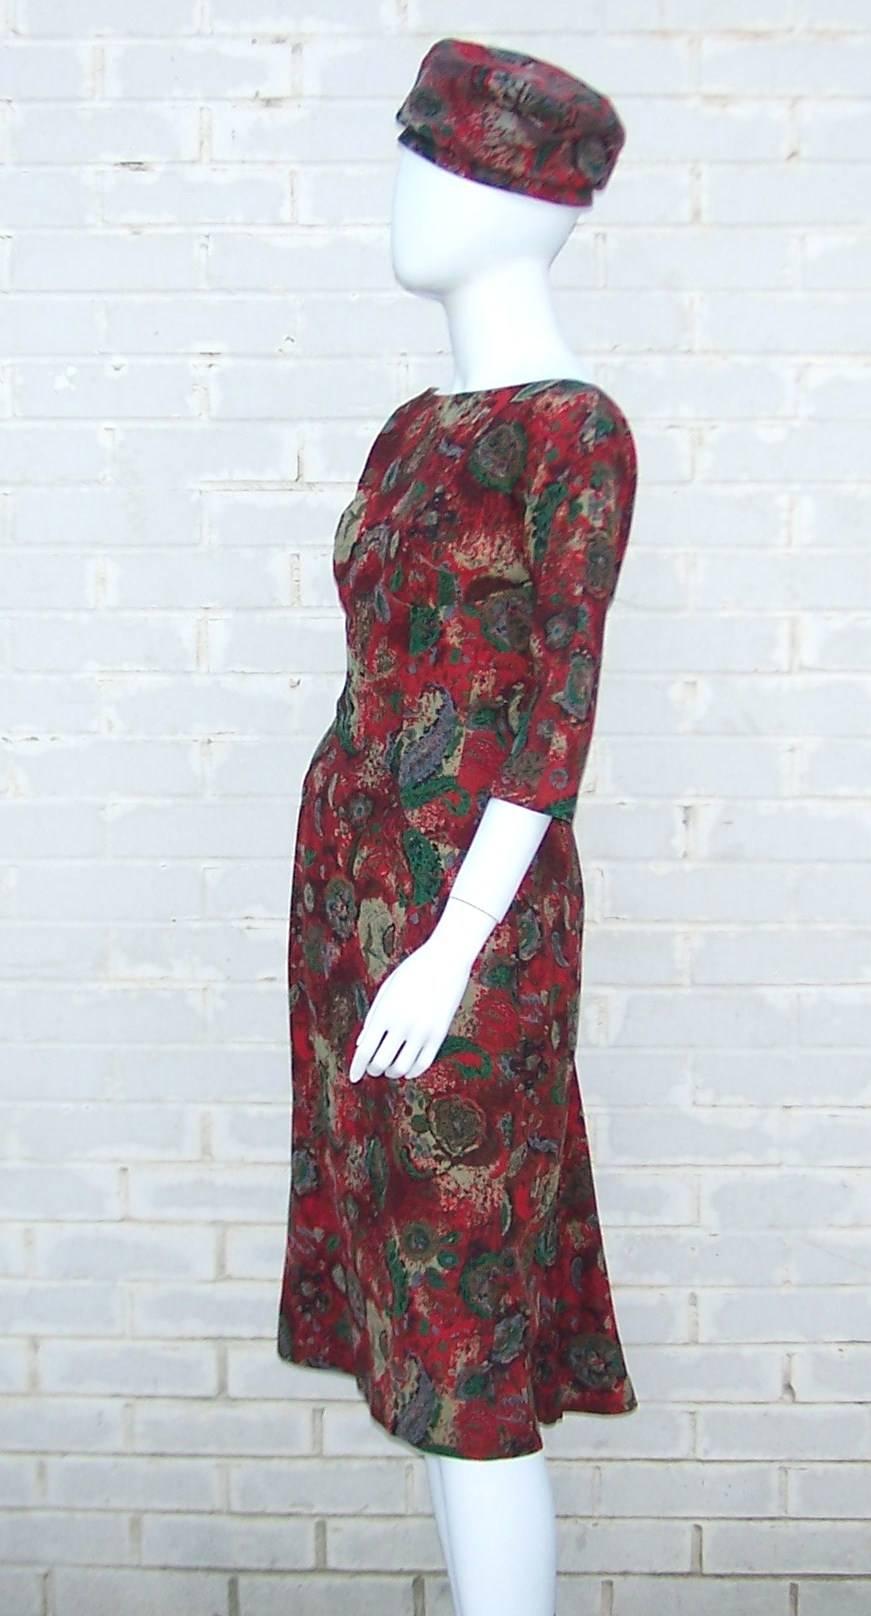 This Suzy Perette dress conjures up visions of an autumn in New York during the 1950's...complete with wonderful Fall colors and an abstract paisley wool blend fabric...picture perfect!  The dress is lined with a zipper down the deep v-back and the